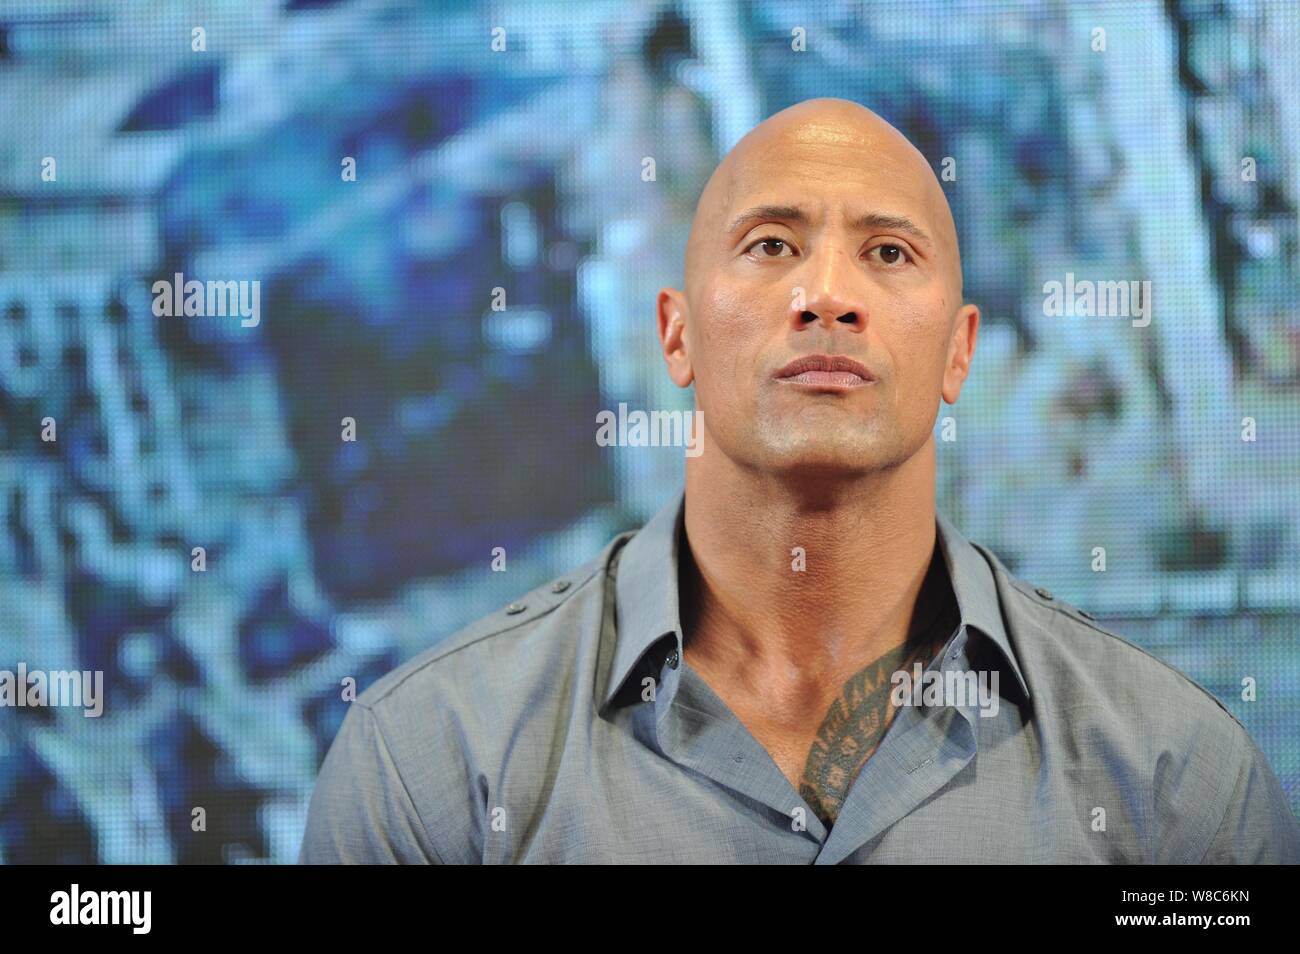 American actor Dwayne Johnson, also known by his ring name The Rock,  attends a press conference for his movie "San Andreas" in Beijing, China,  28 May Stock Photo - Alamy